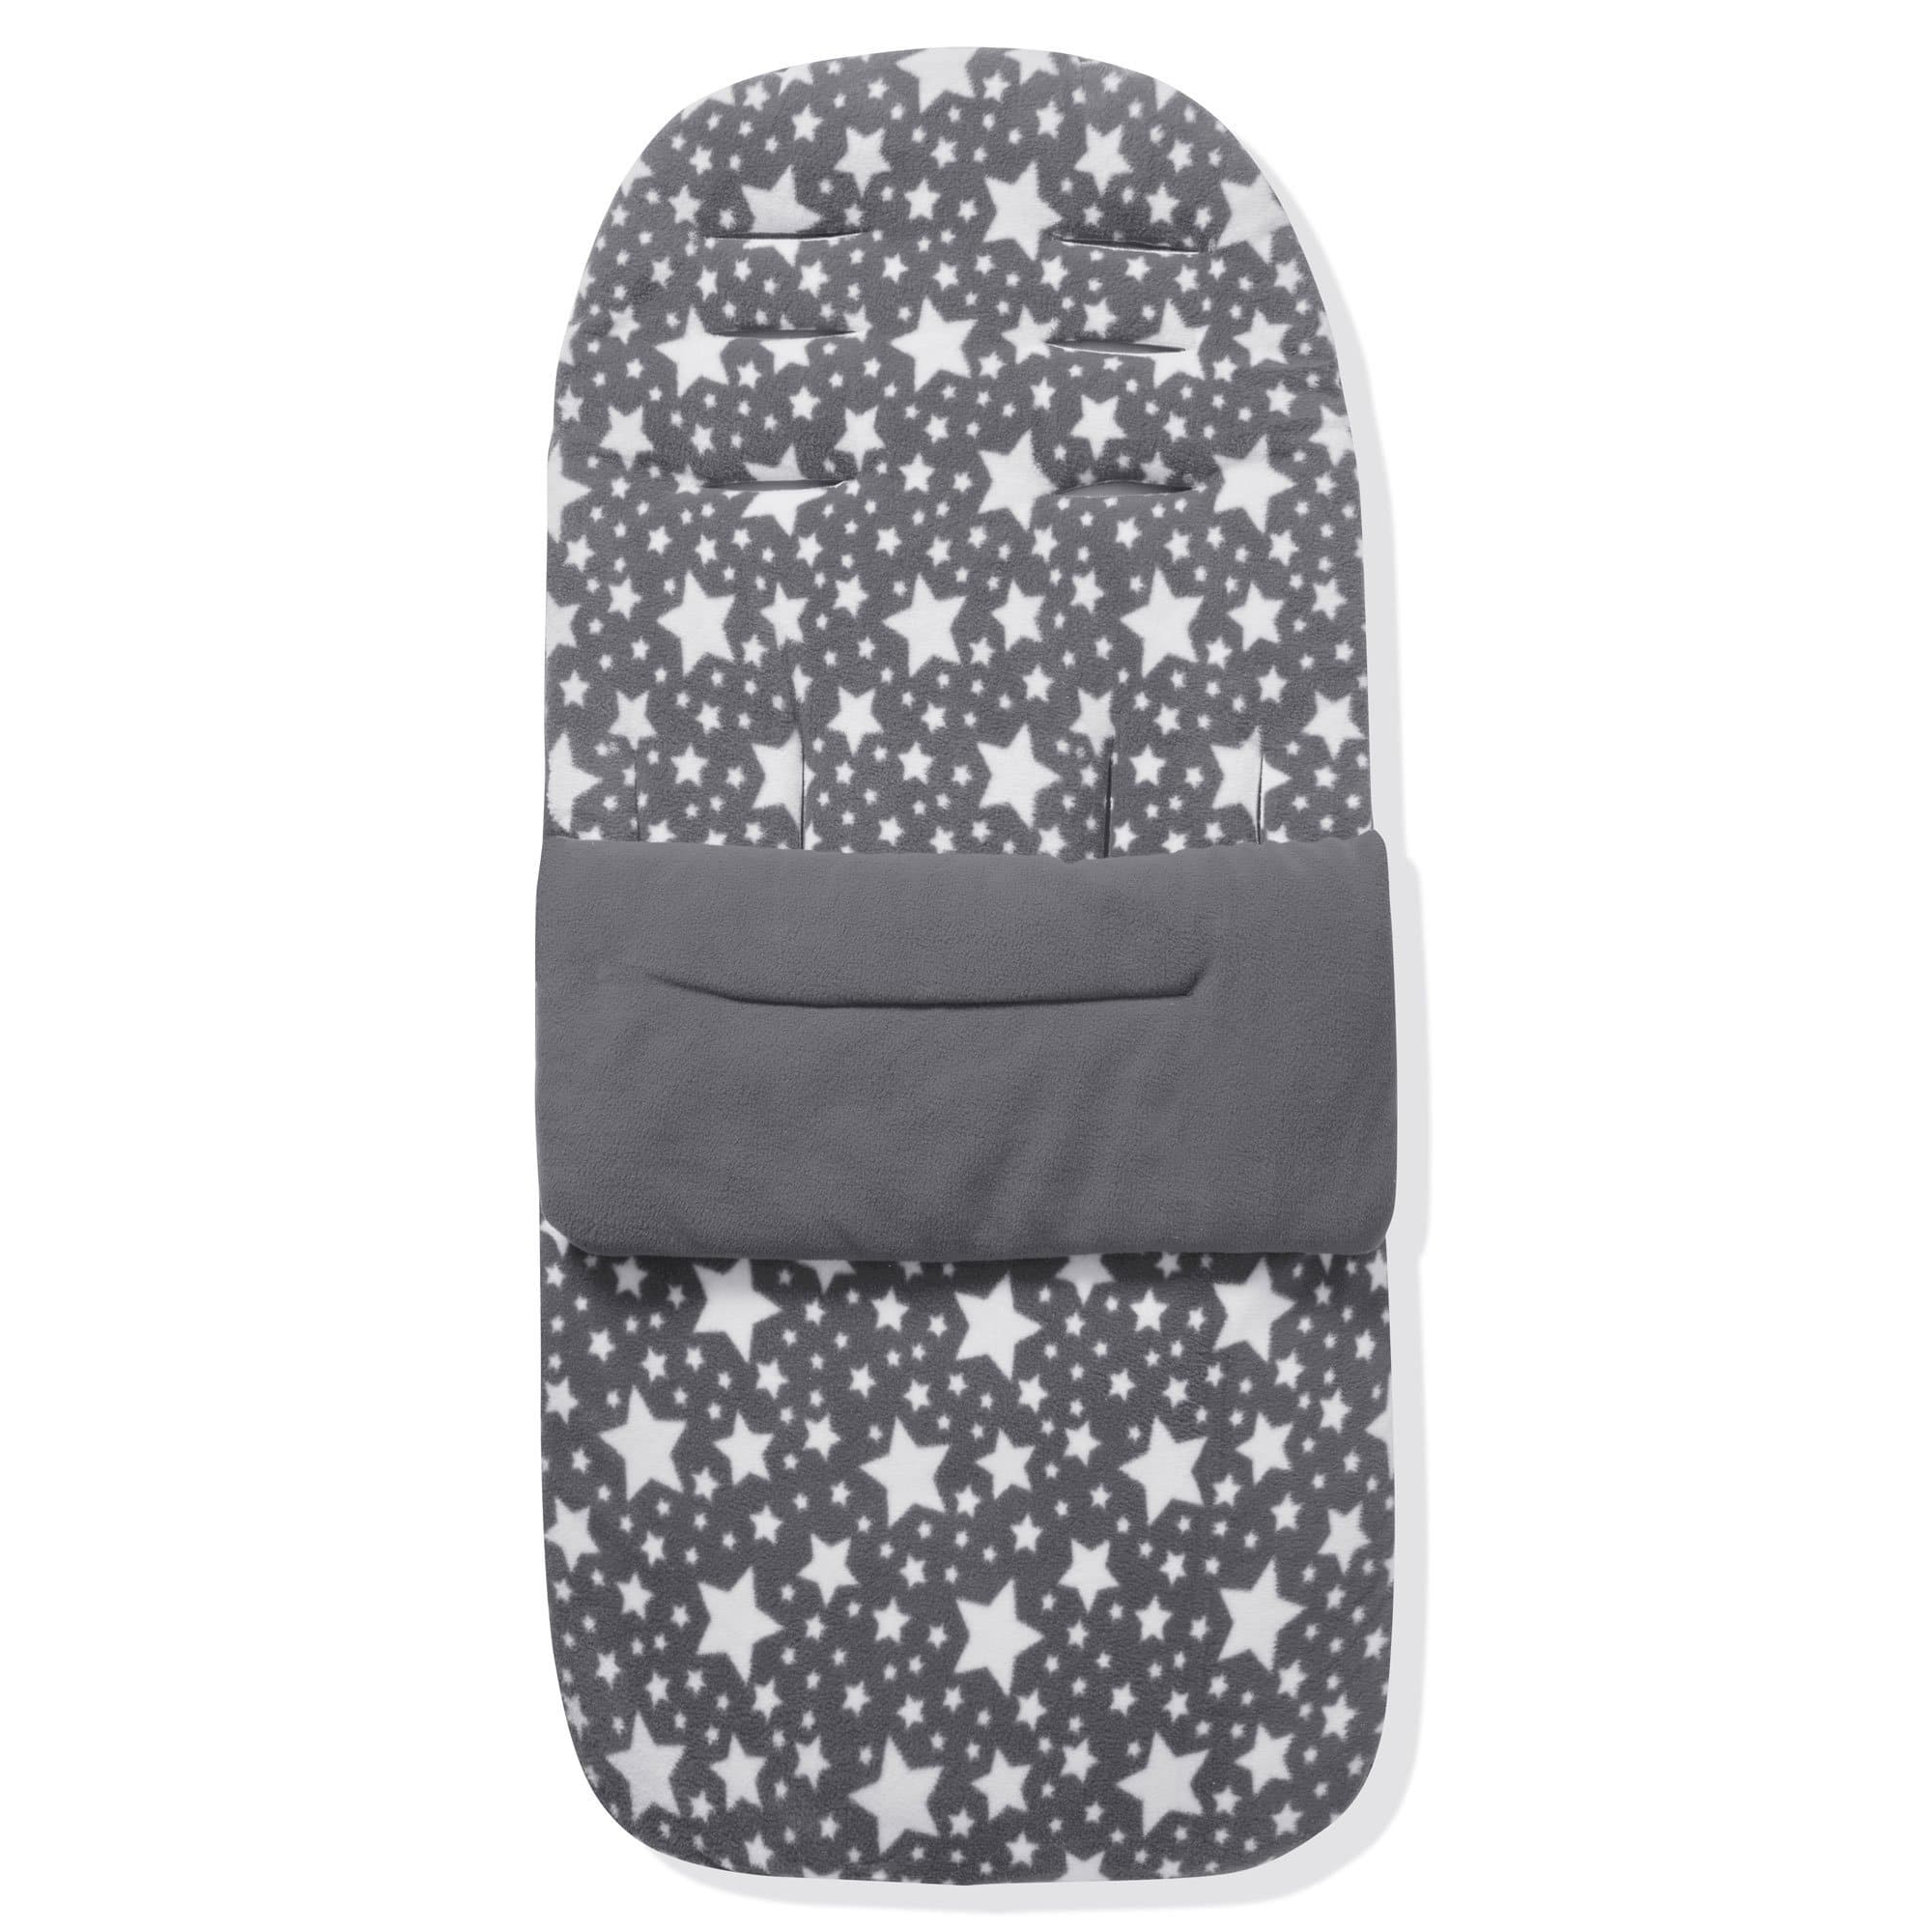 Fleece Footmuff / Cosy Toes Compatible with Mamas & Papas - Grey Star / Fits All Models | For Your Little One